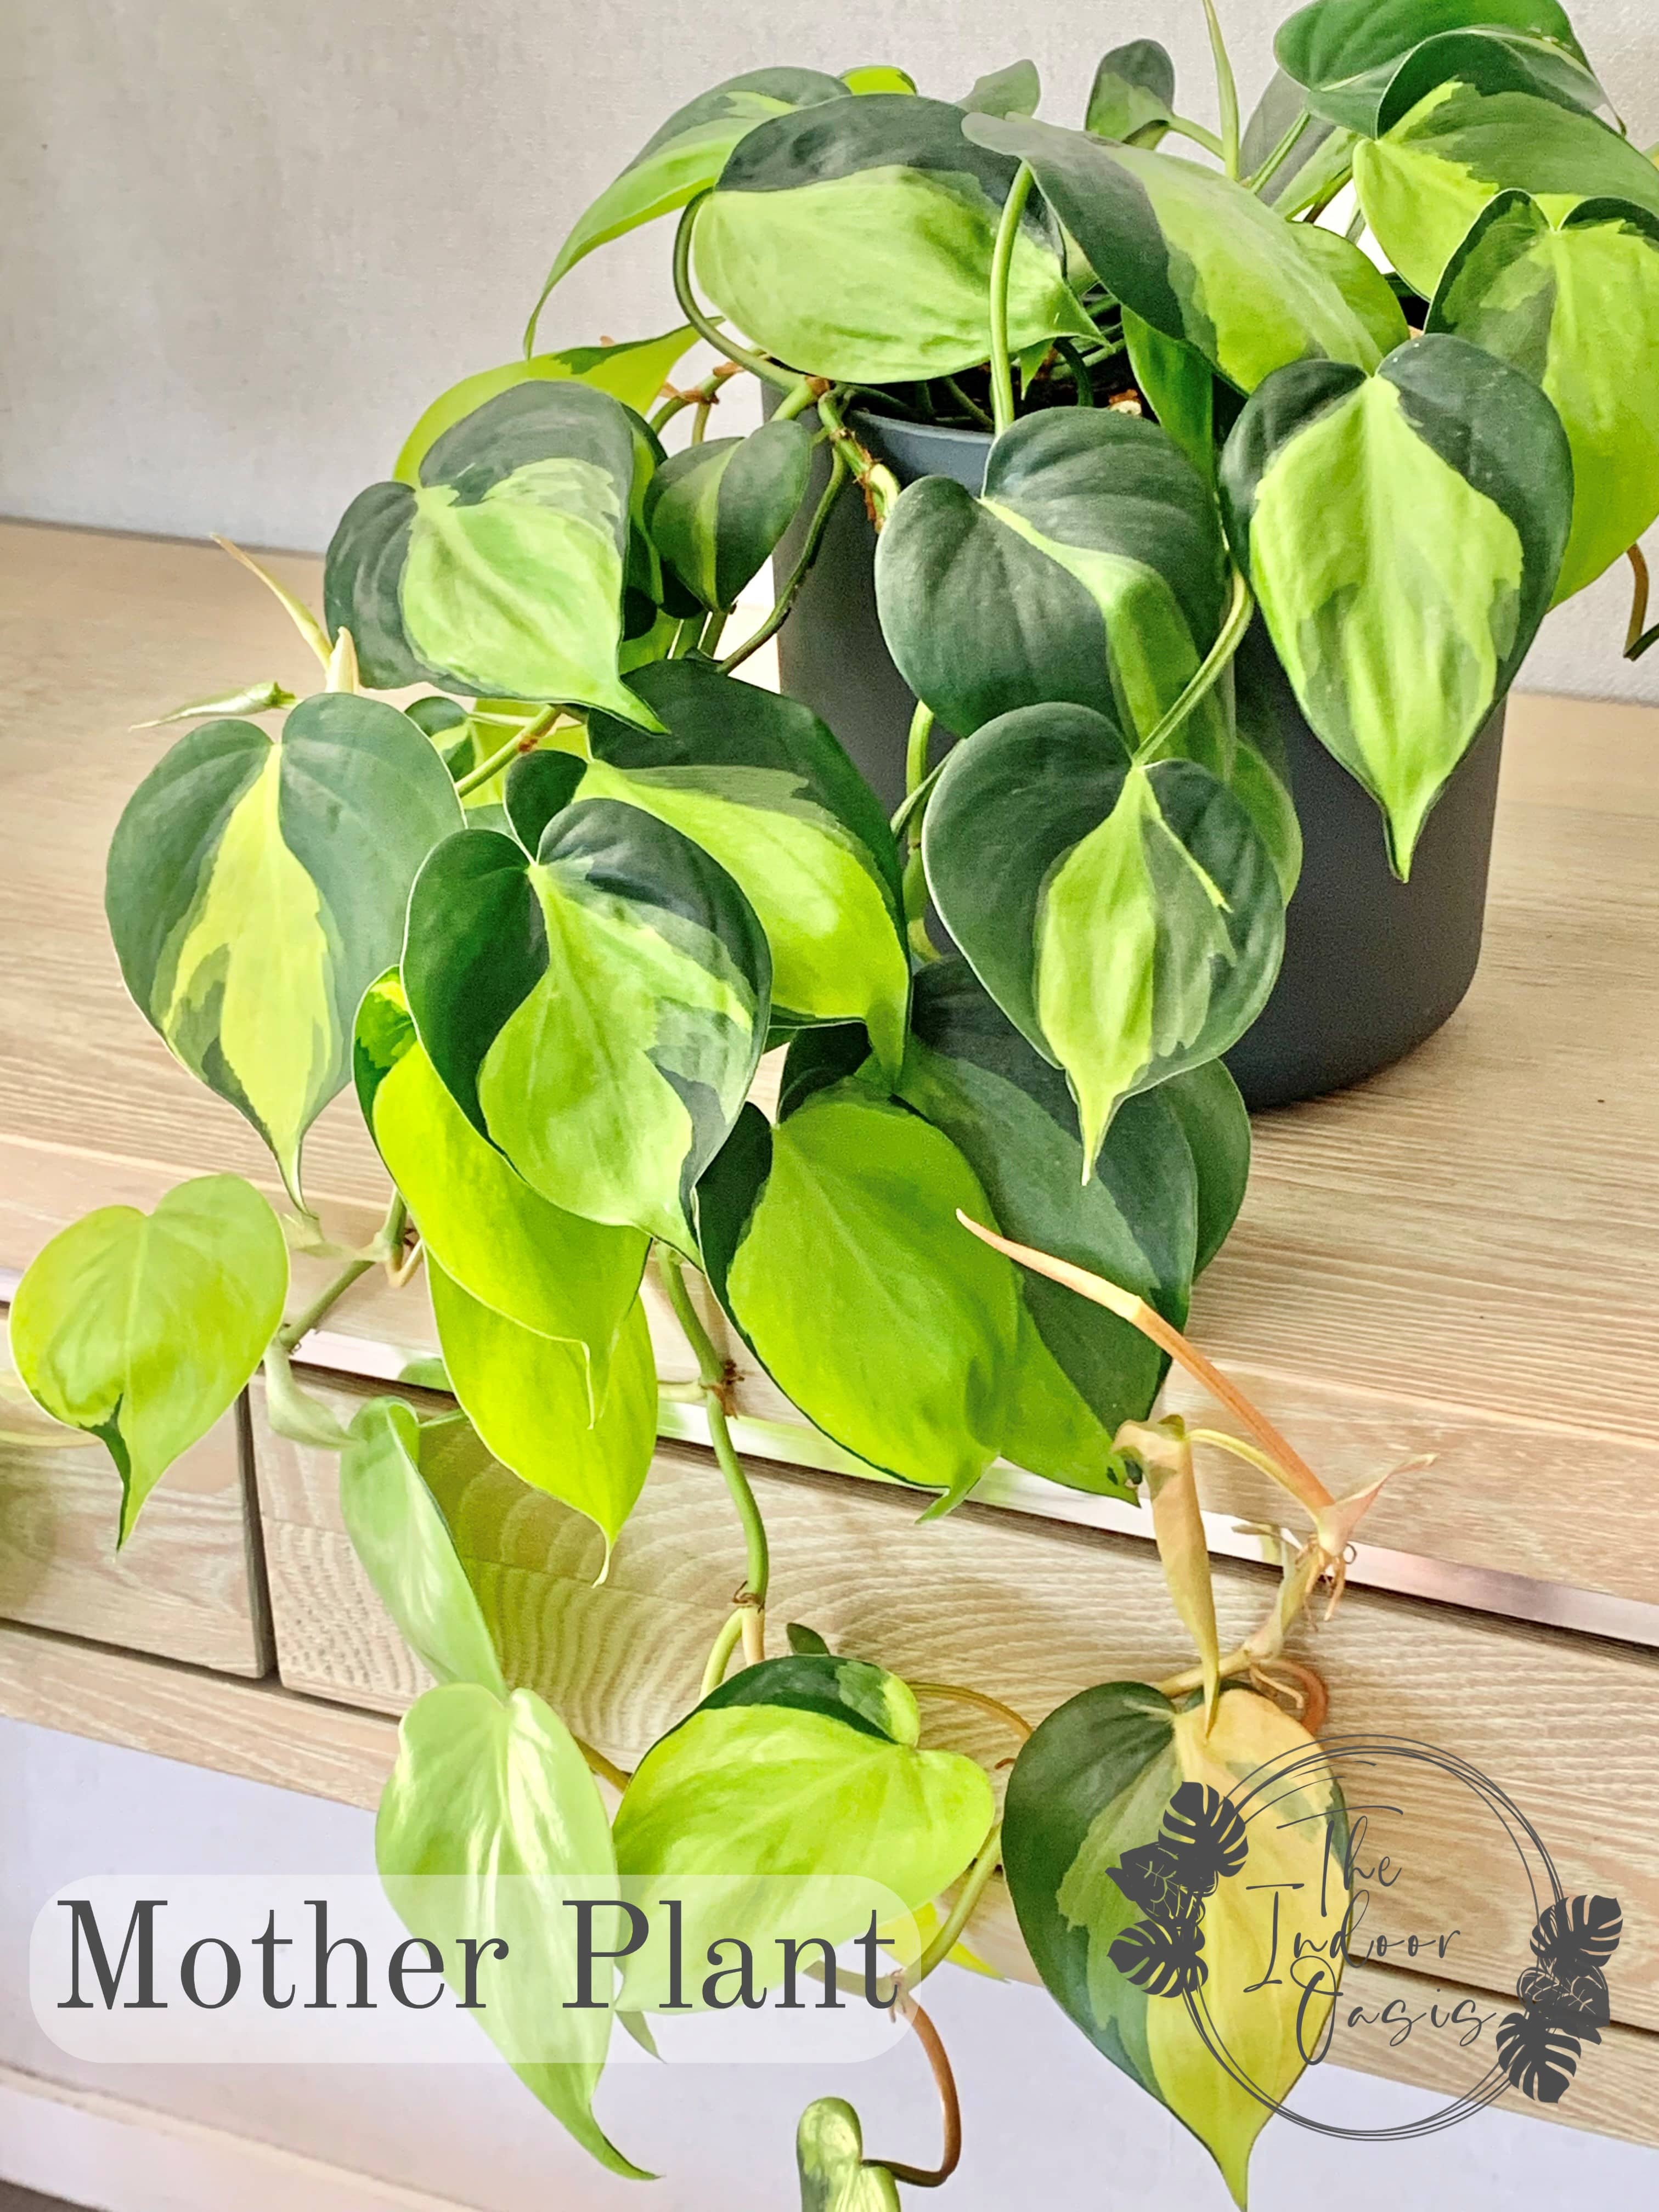 Philodendron Brasil Mature Mother Plant The Indoor Oasis NZ